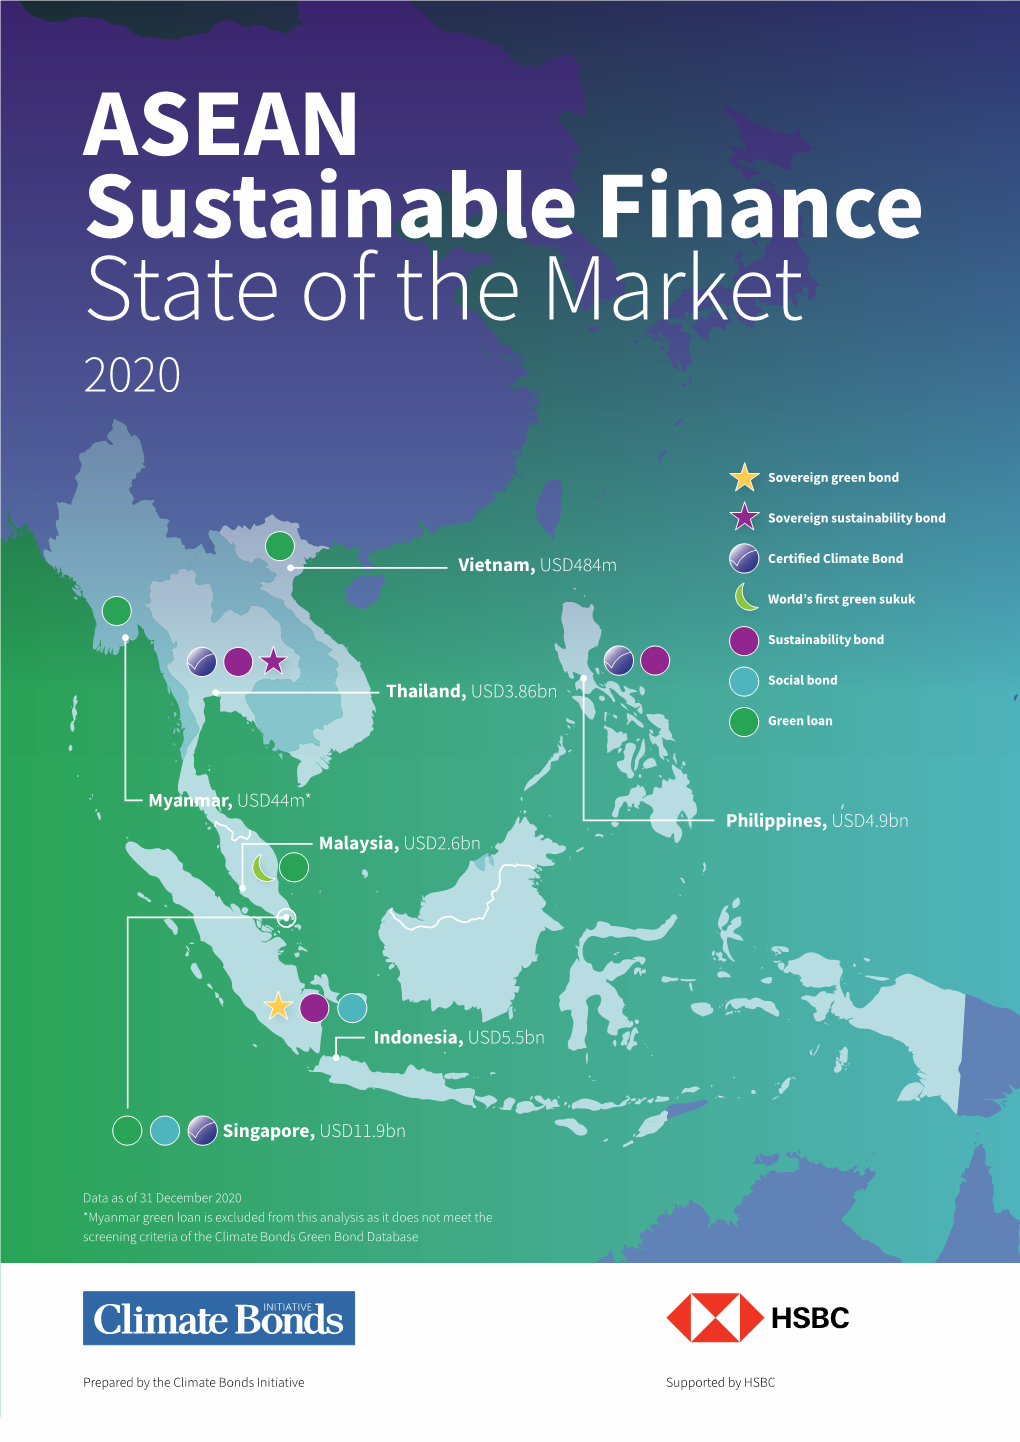 ASEAN Sustainable Finance State of the Market 2020